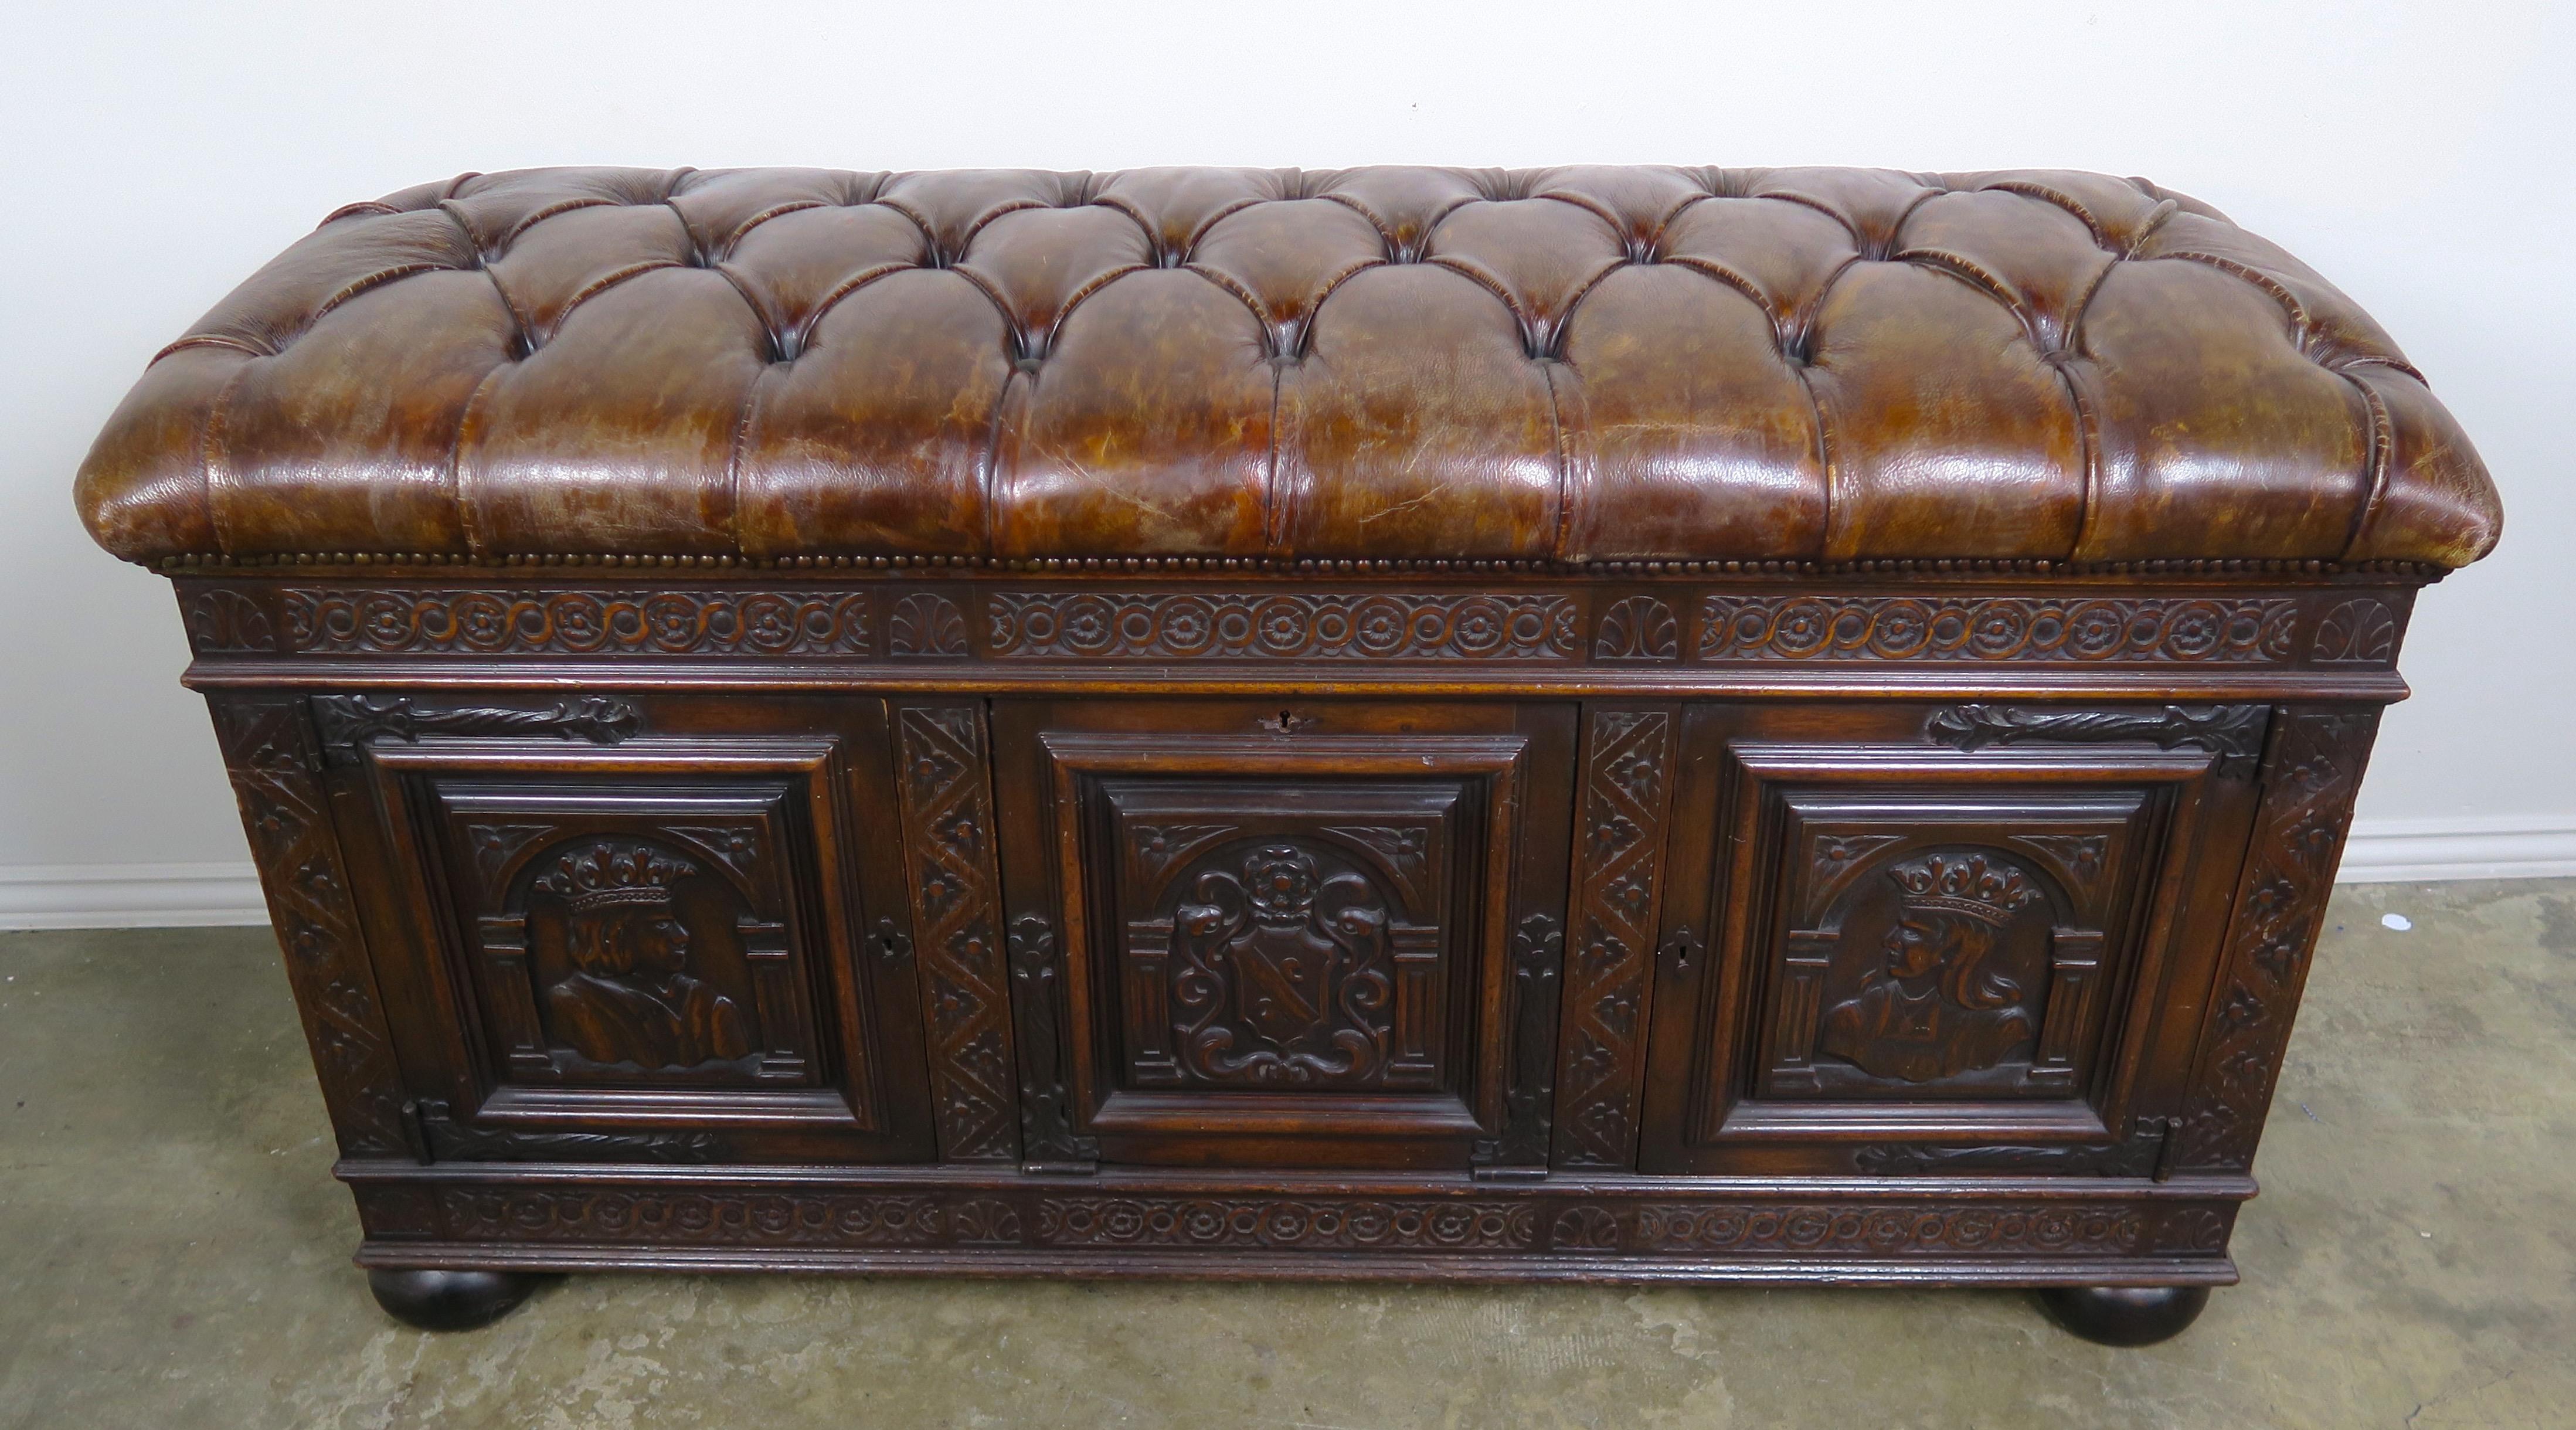 Renaissance English Oak Leather Tufted Bench with Storage, circa 1900s